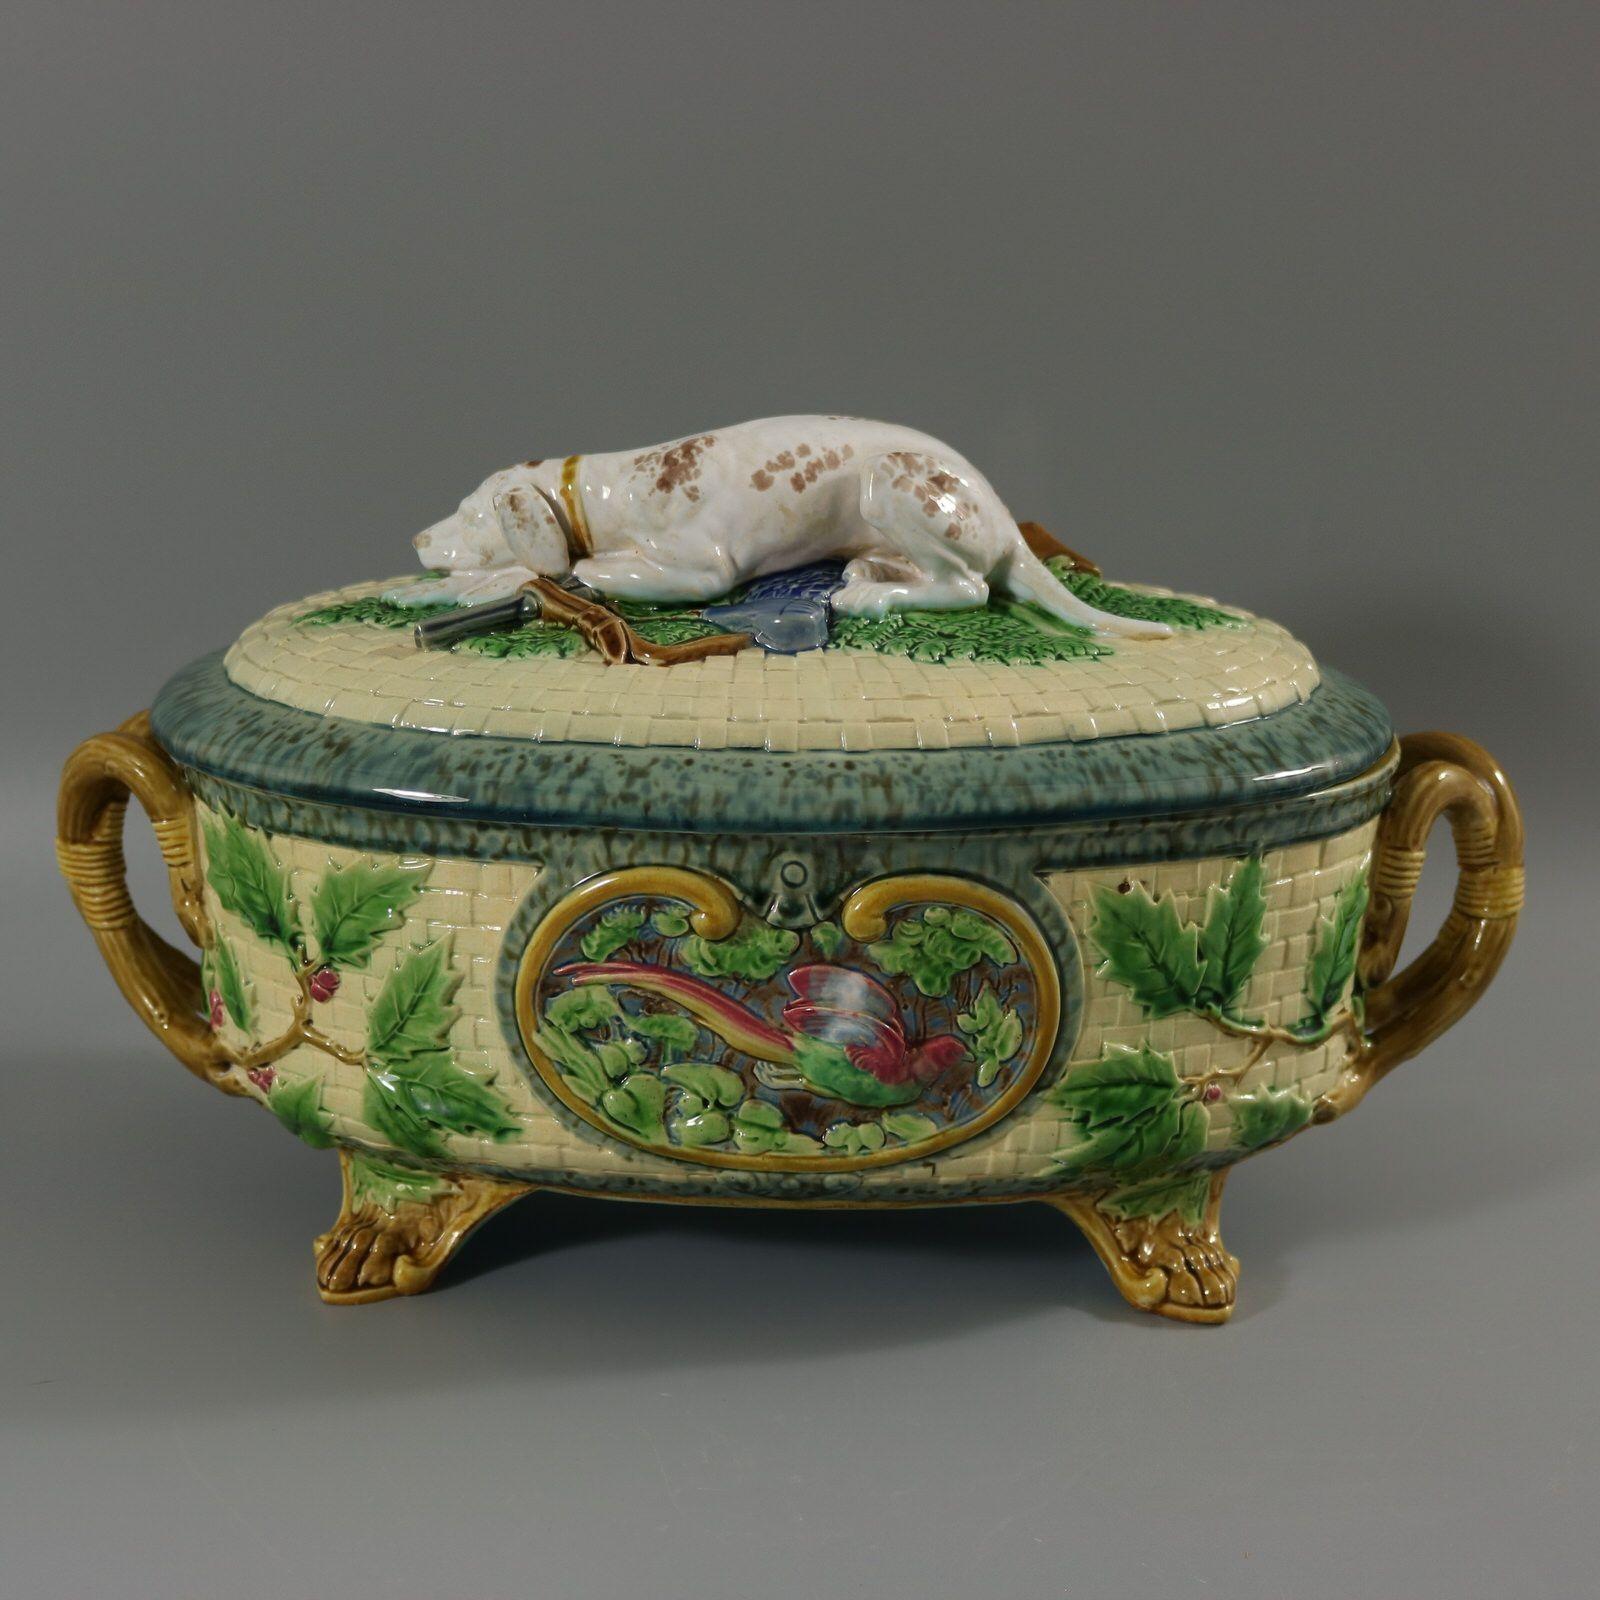 Minton Majolica game pie dish with liner which features a hunting dog asleep next to a gun, a powder flask and a game bag. Colouration: cream, green, brown, are predominant. The piece bears maker's marks for the Minton pottery. Bears a pattern